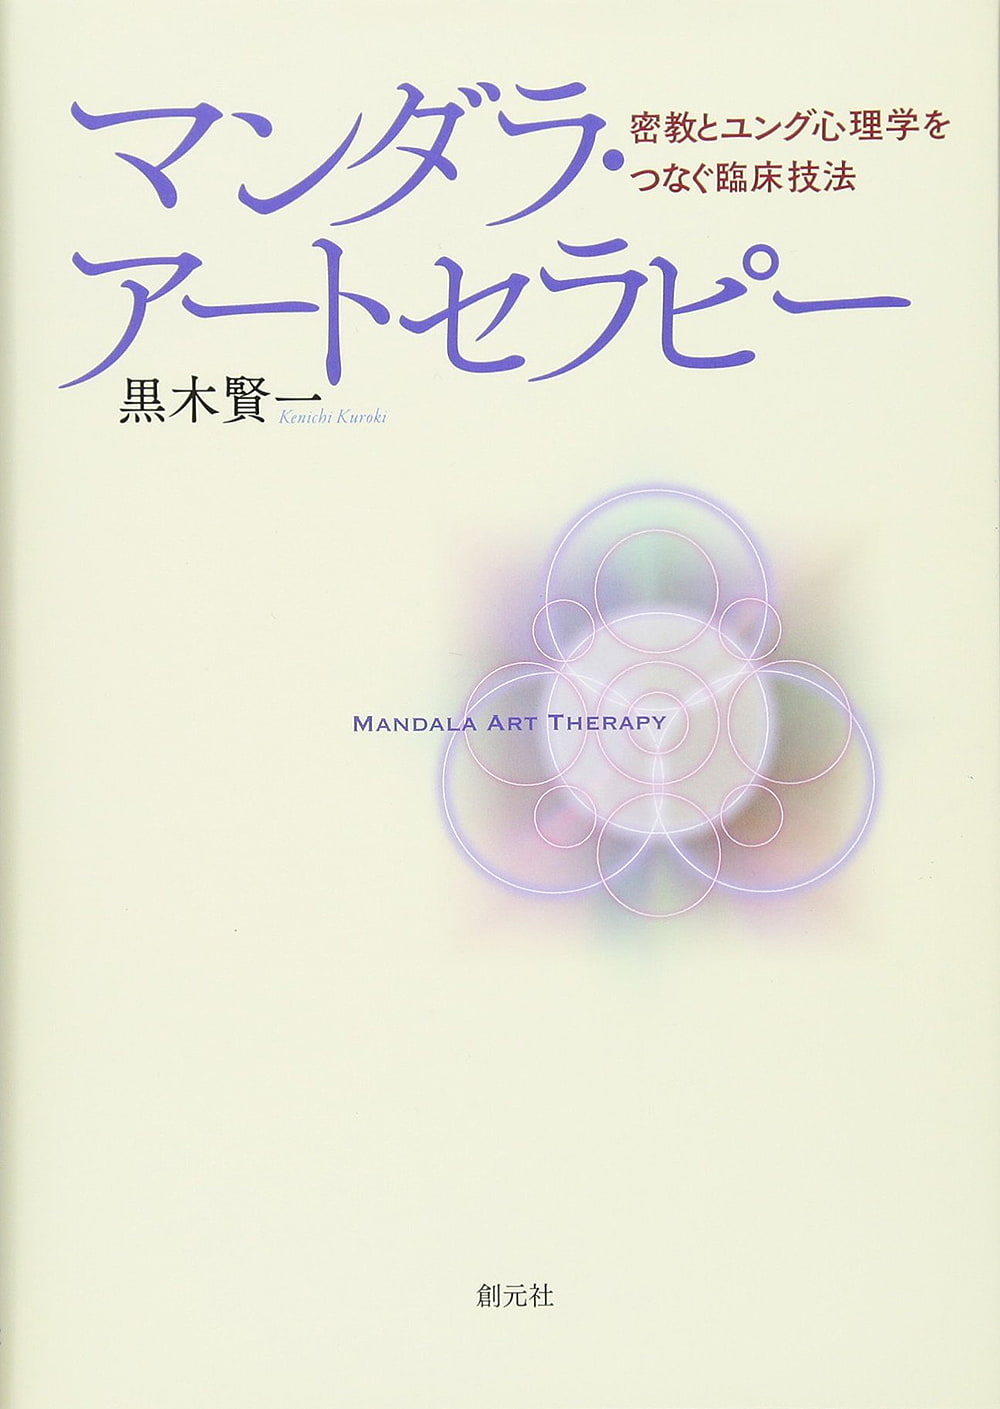 Jungian　の通販　technique　A　マンダラ・アートセラピー　Mandala　clinical　Buddhism　Art　Therapy　esoteric　that　connects　and